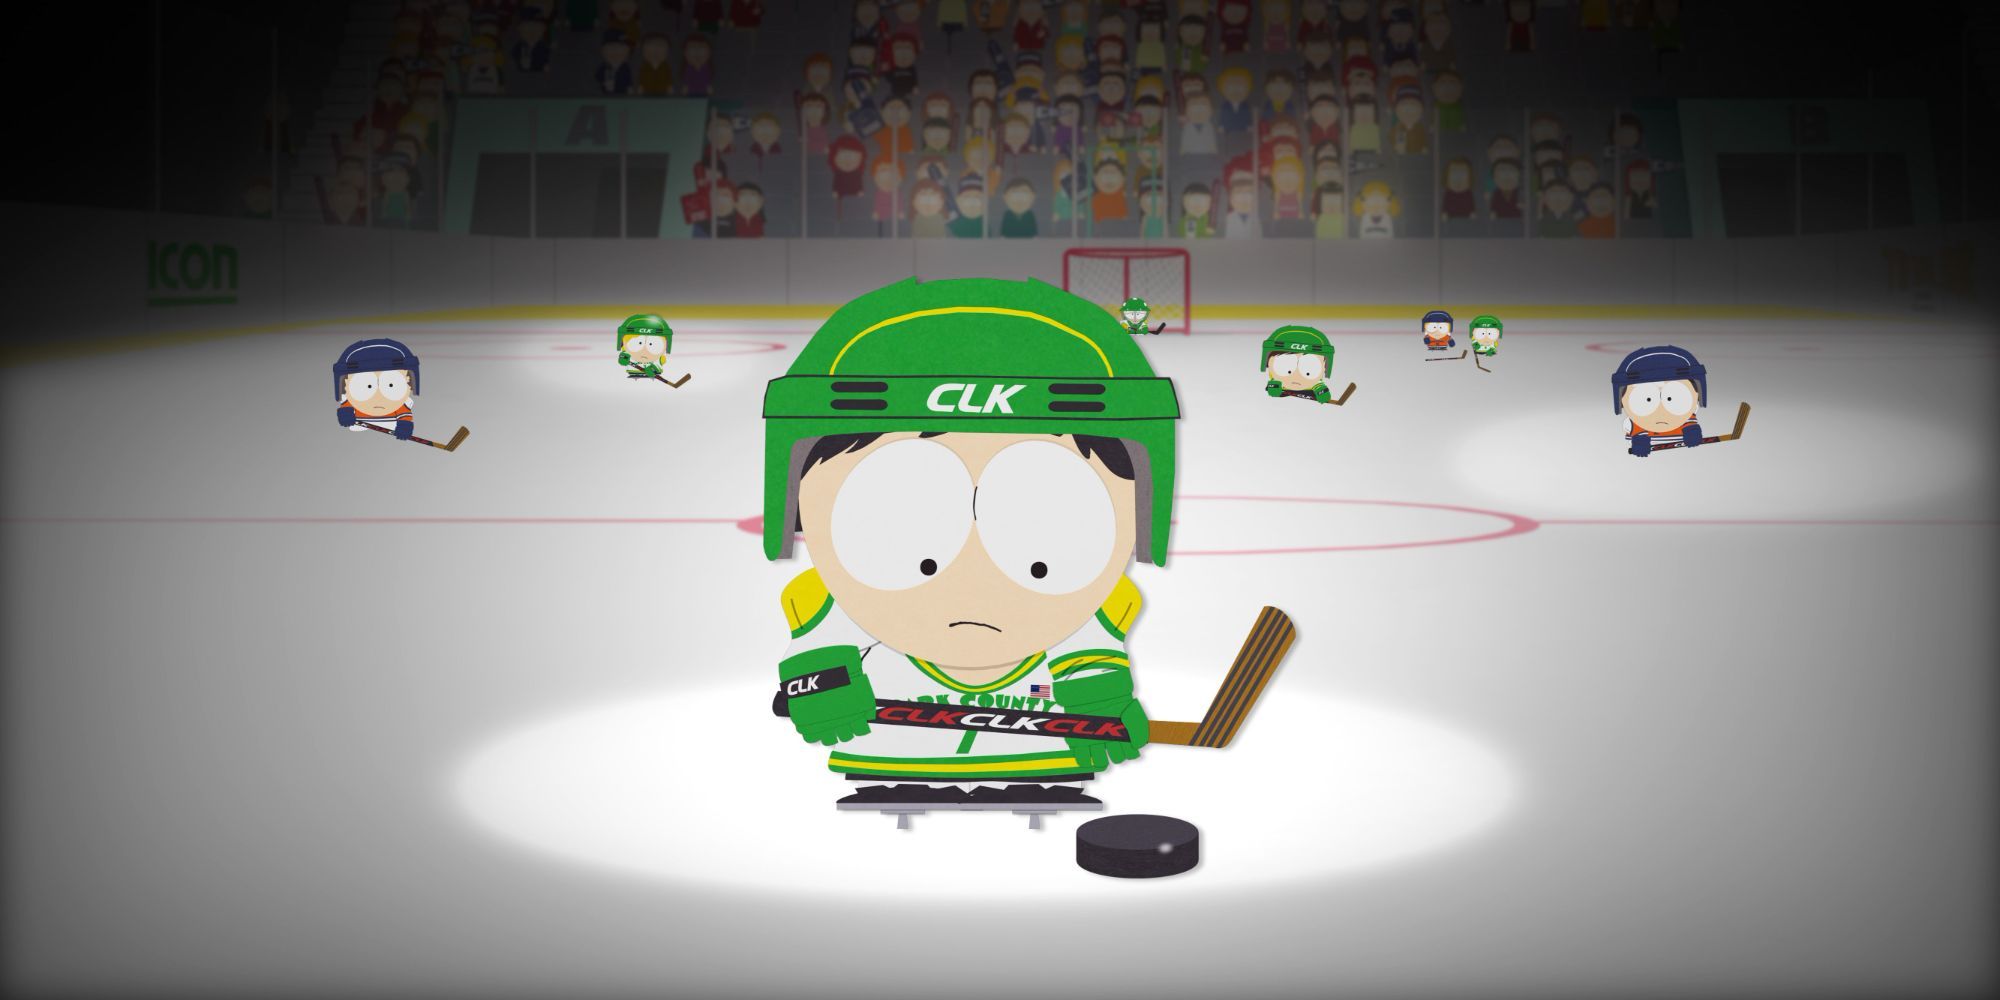 A junior hockey player prepares to shoot at Stanley's Cup (South Park)